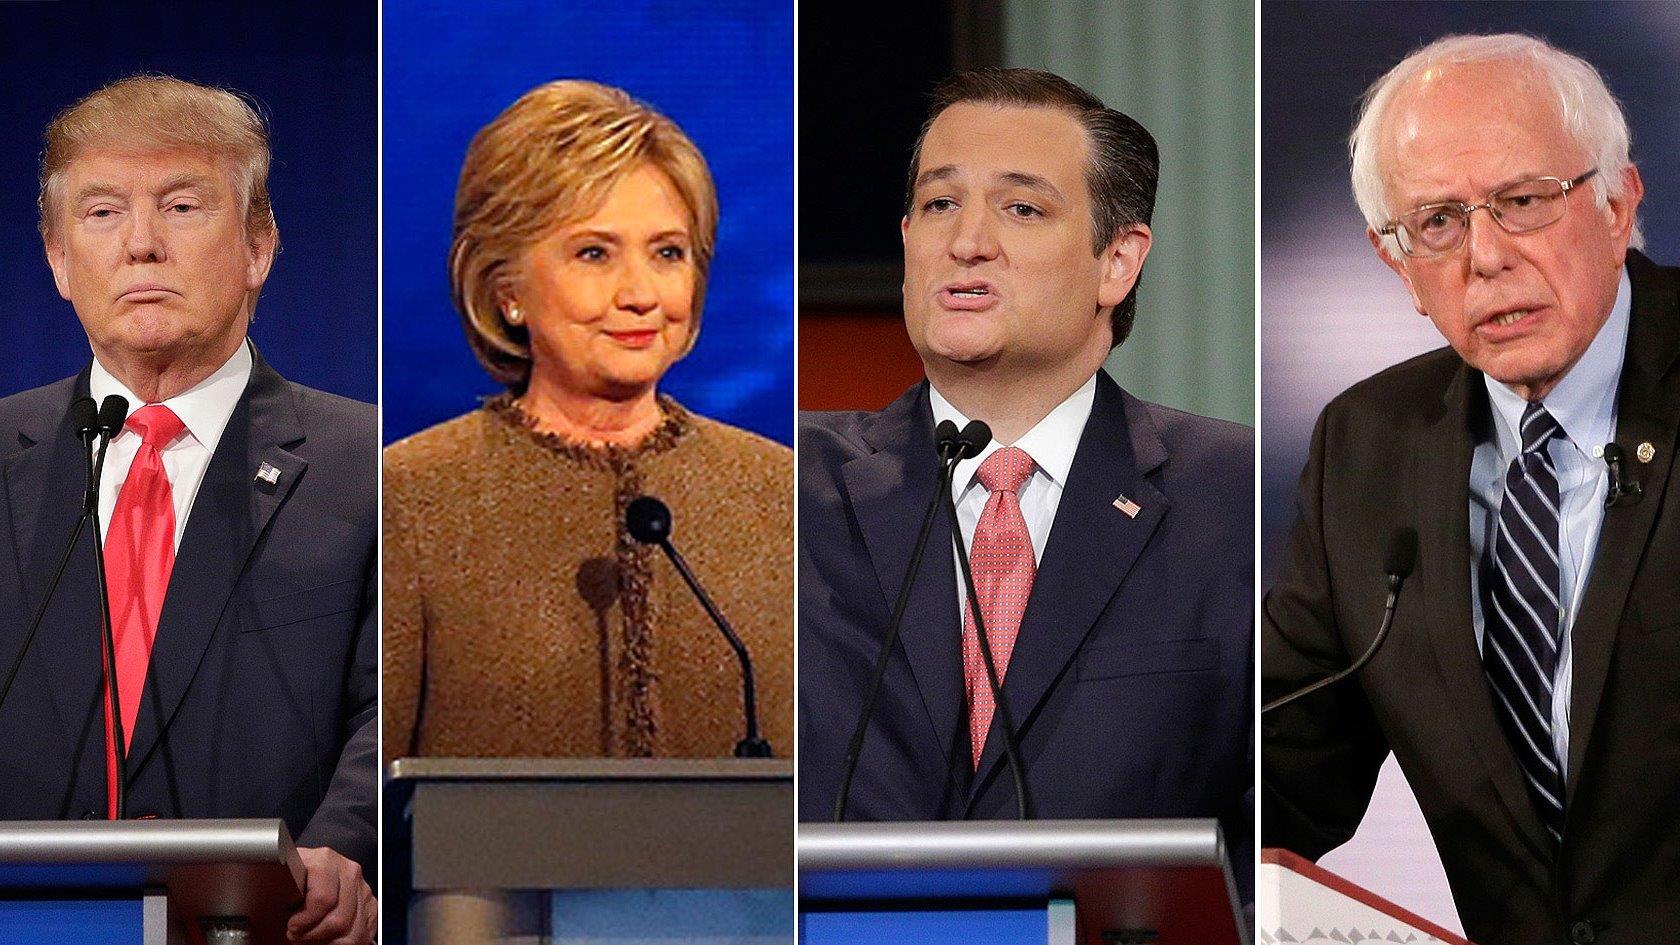 Winners and losers from the Iowa caucuses